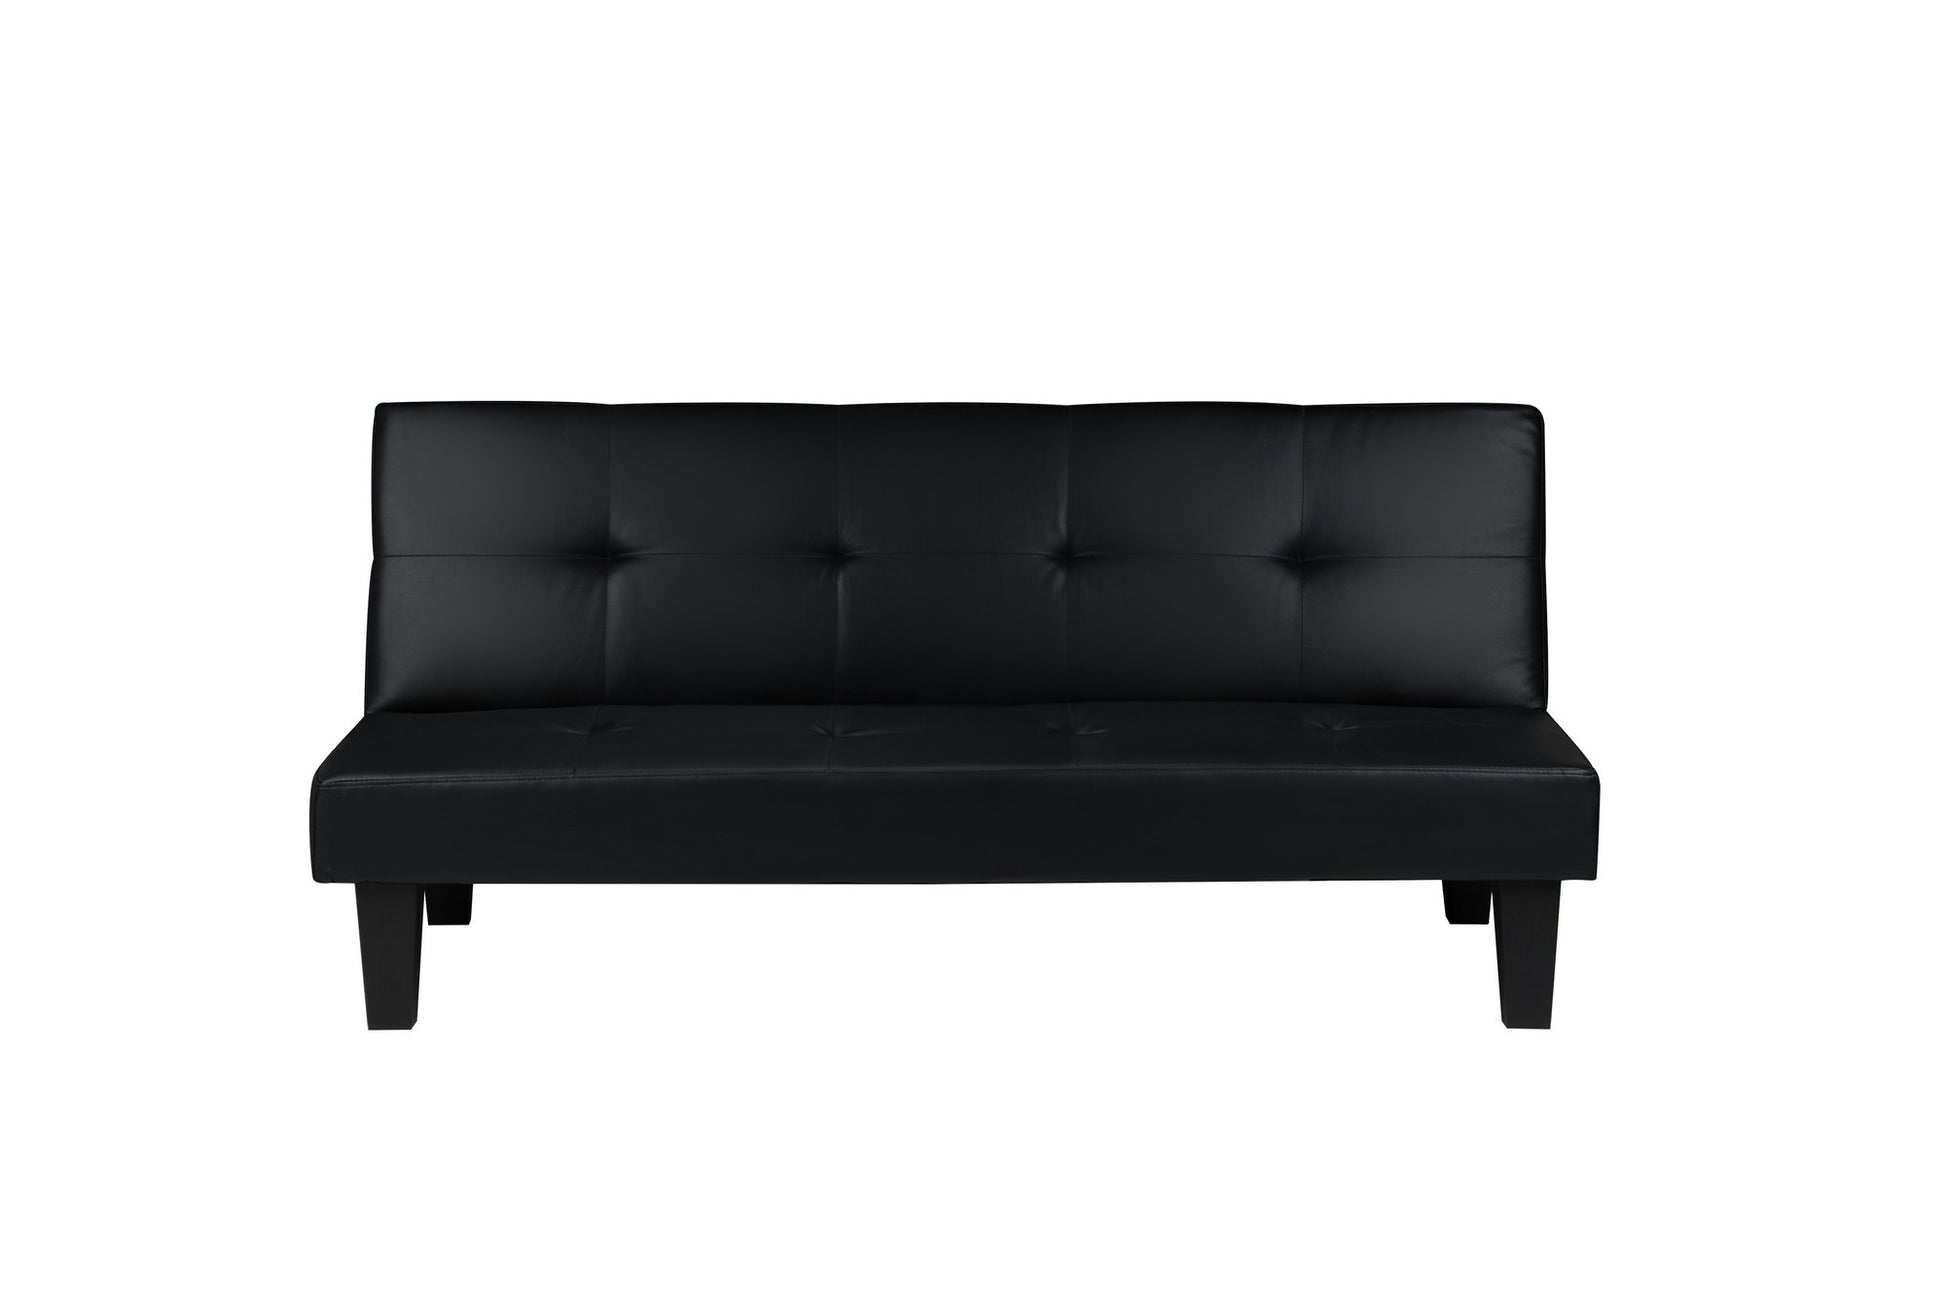 Franklin Sofa Bed - Classic Contemporary Design, Eucalyptus Wood Frame, Comfortable Foam Filling, Faux Leather Upholstery